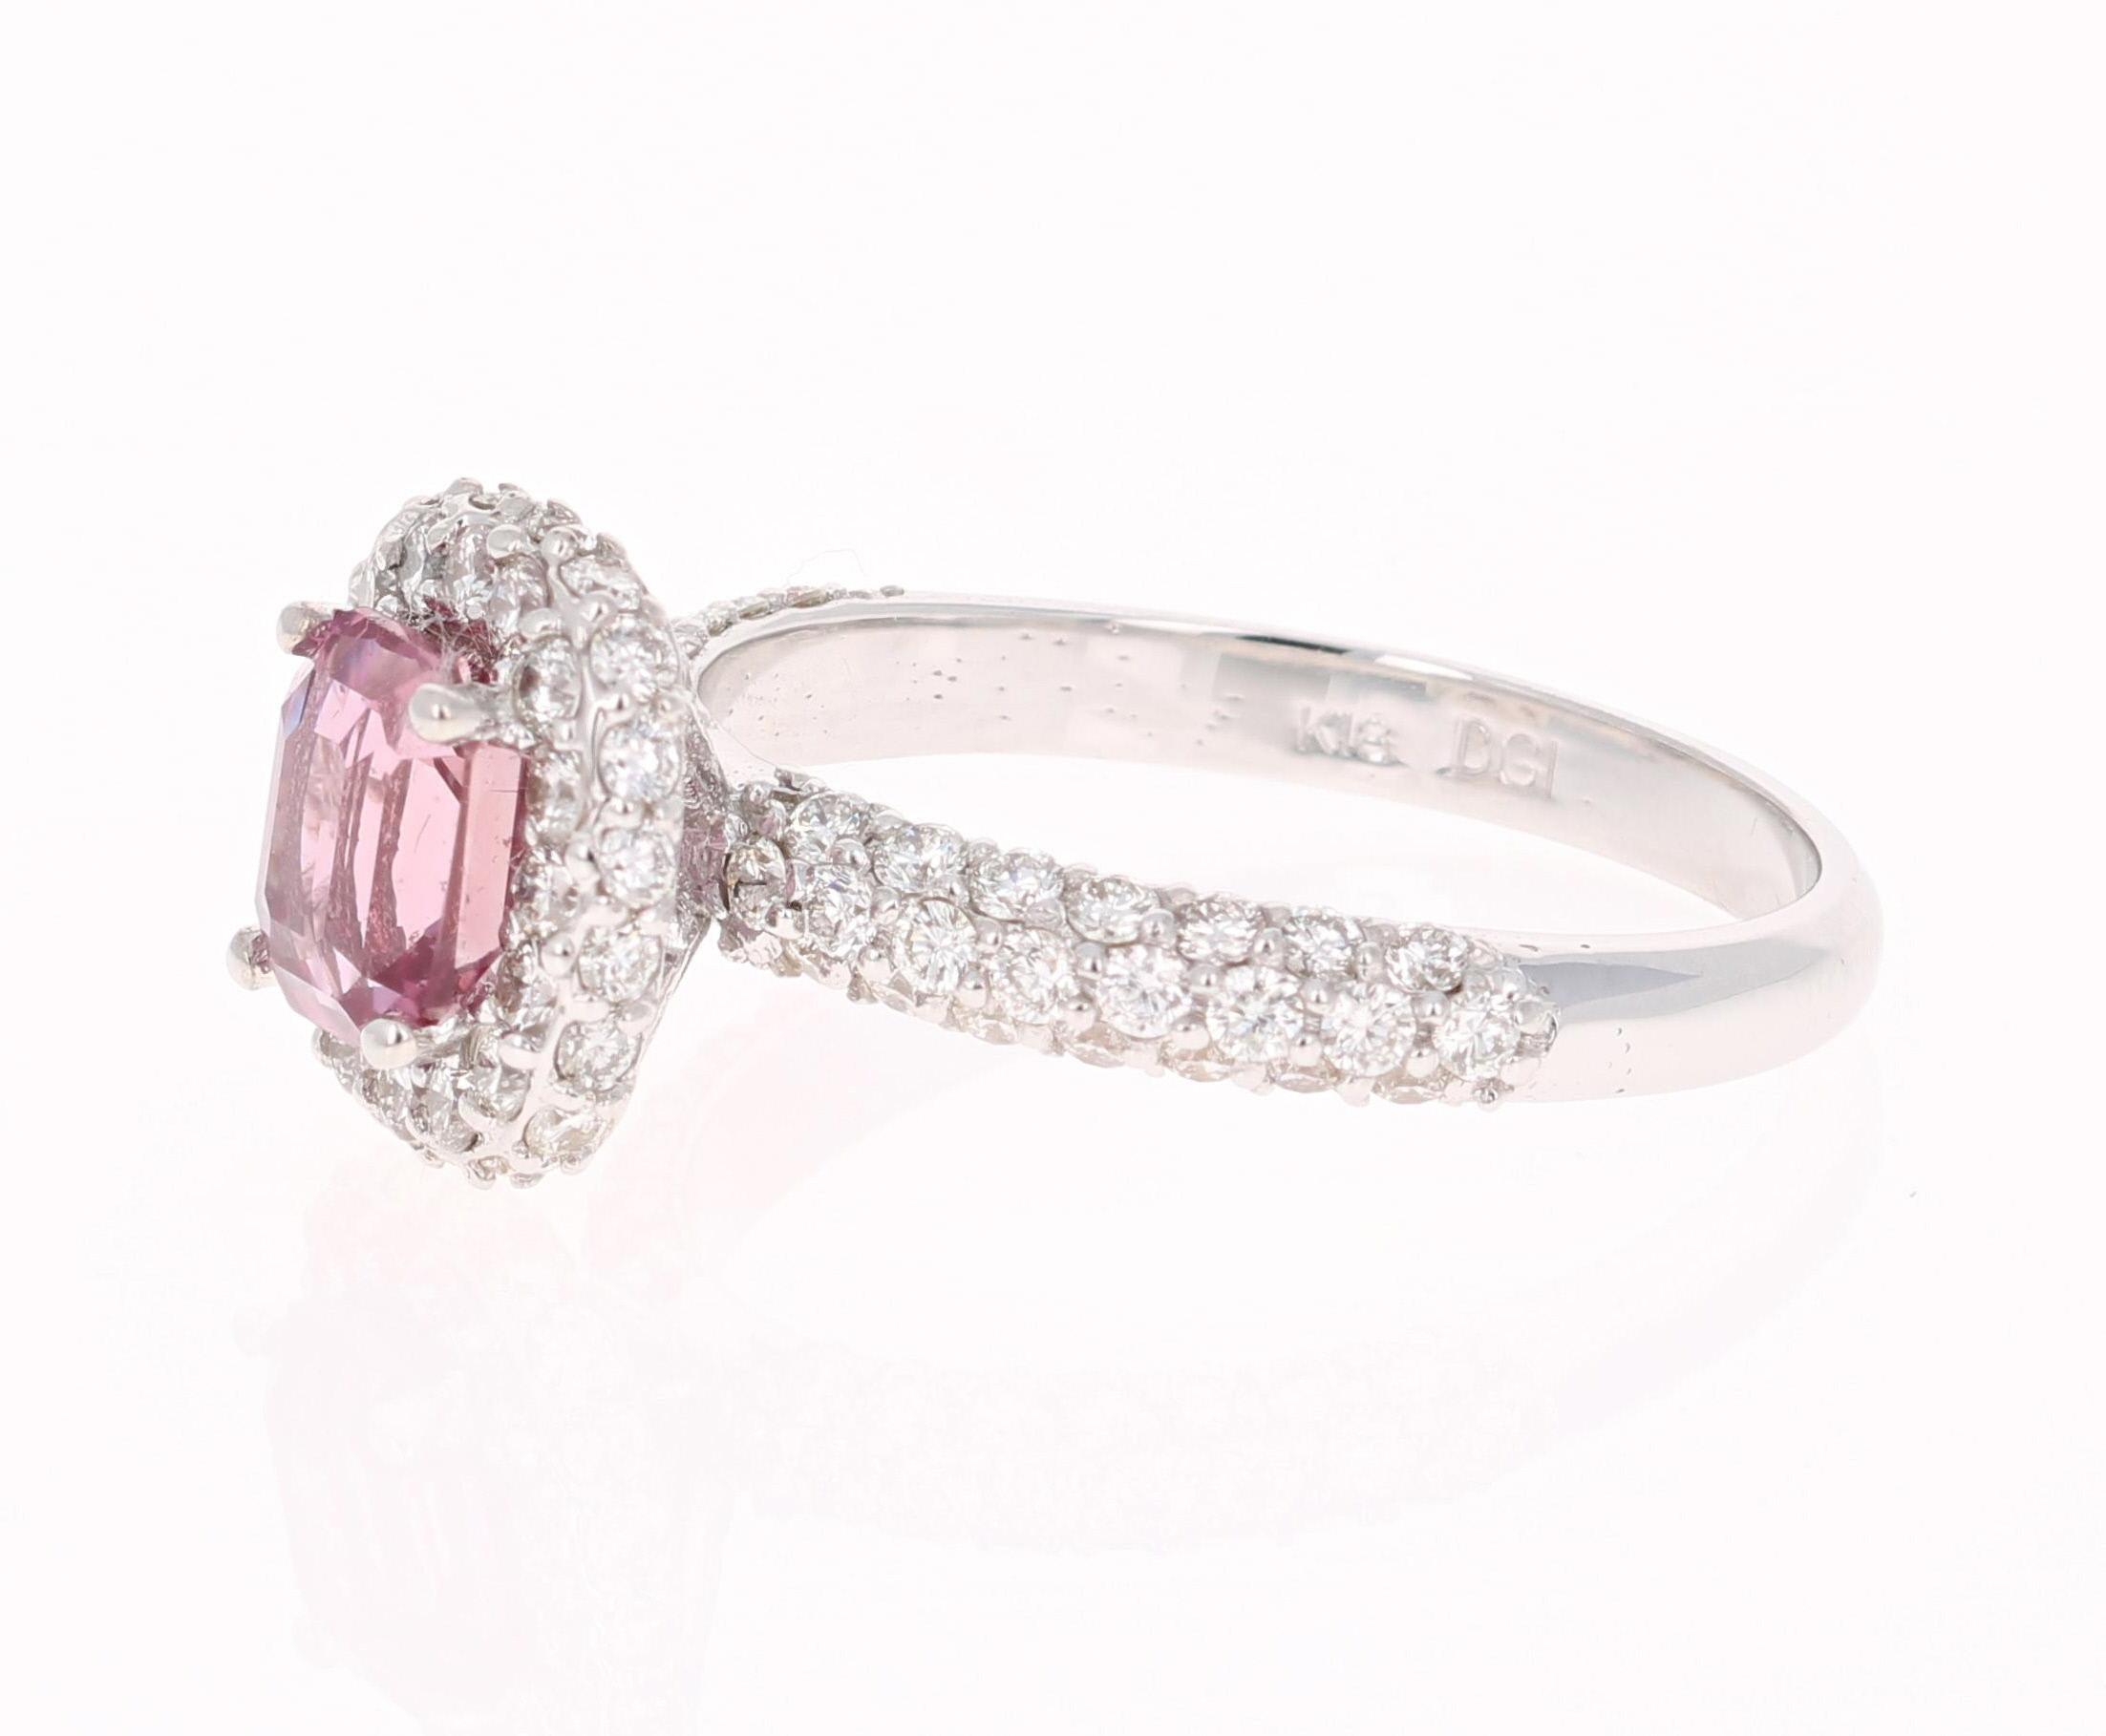 Contemporary GIA Certified 2.44 Carat Pink Sapphire Diamond White Gold Engagement Ring For Sale